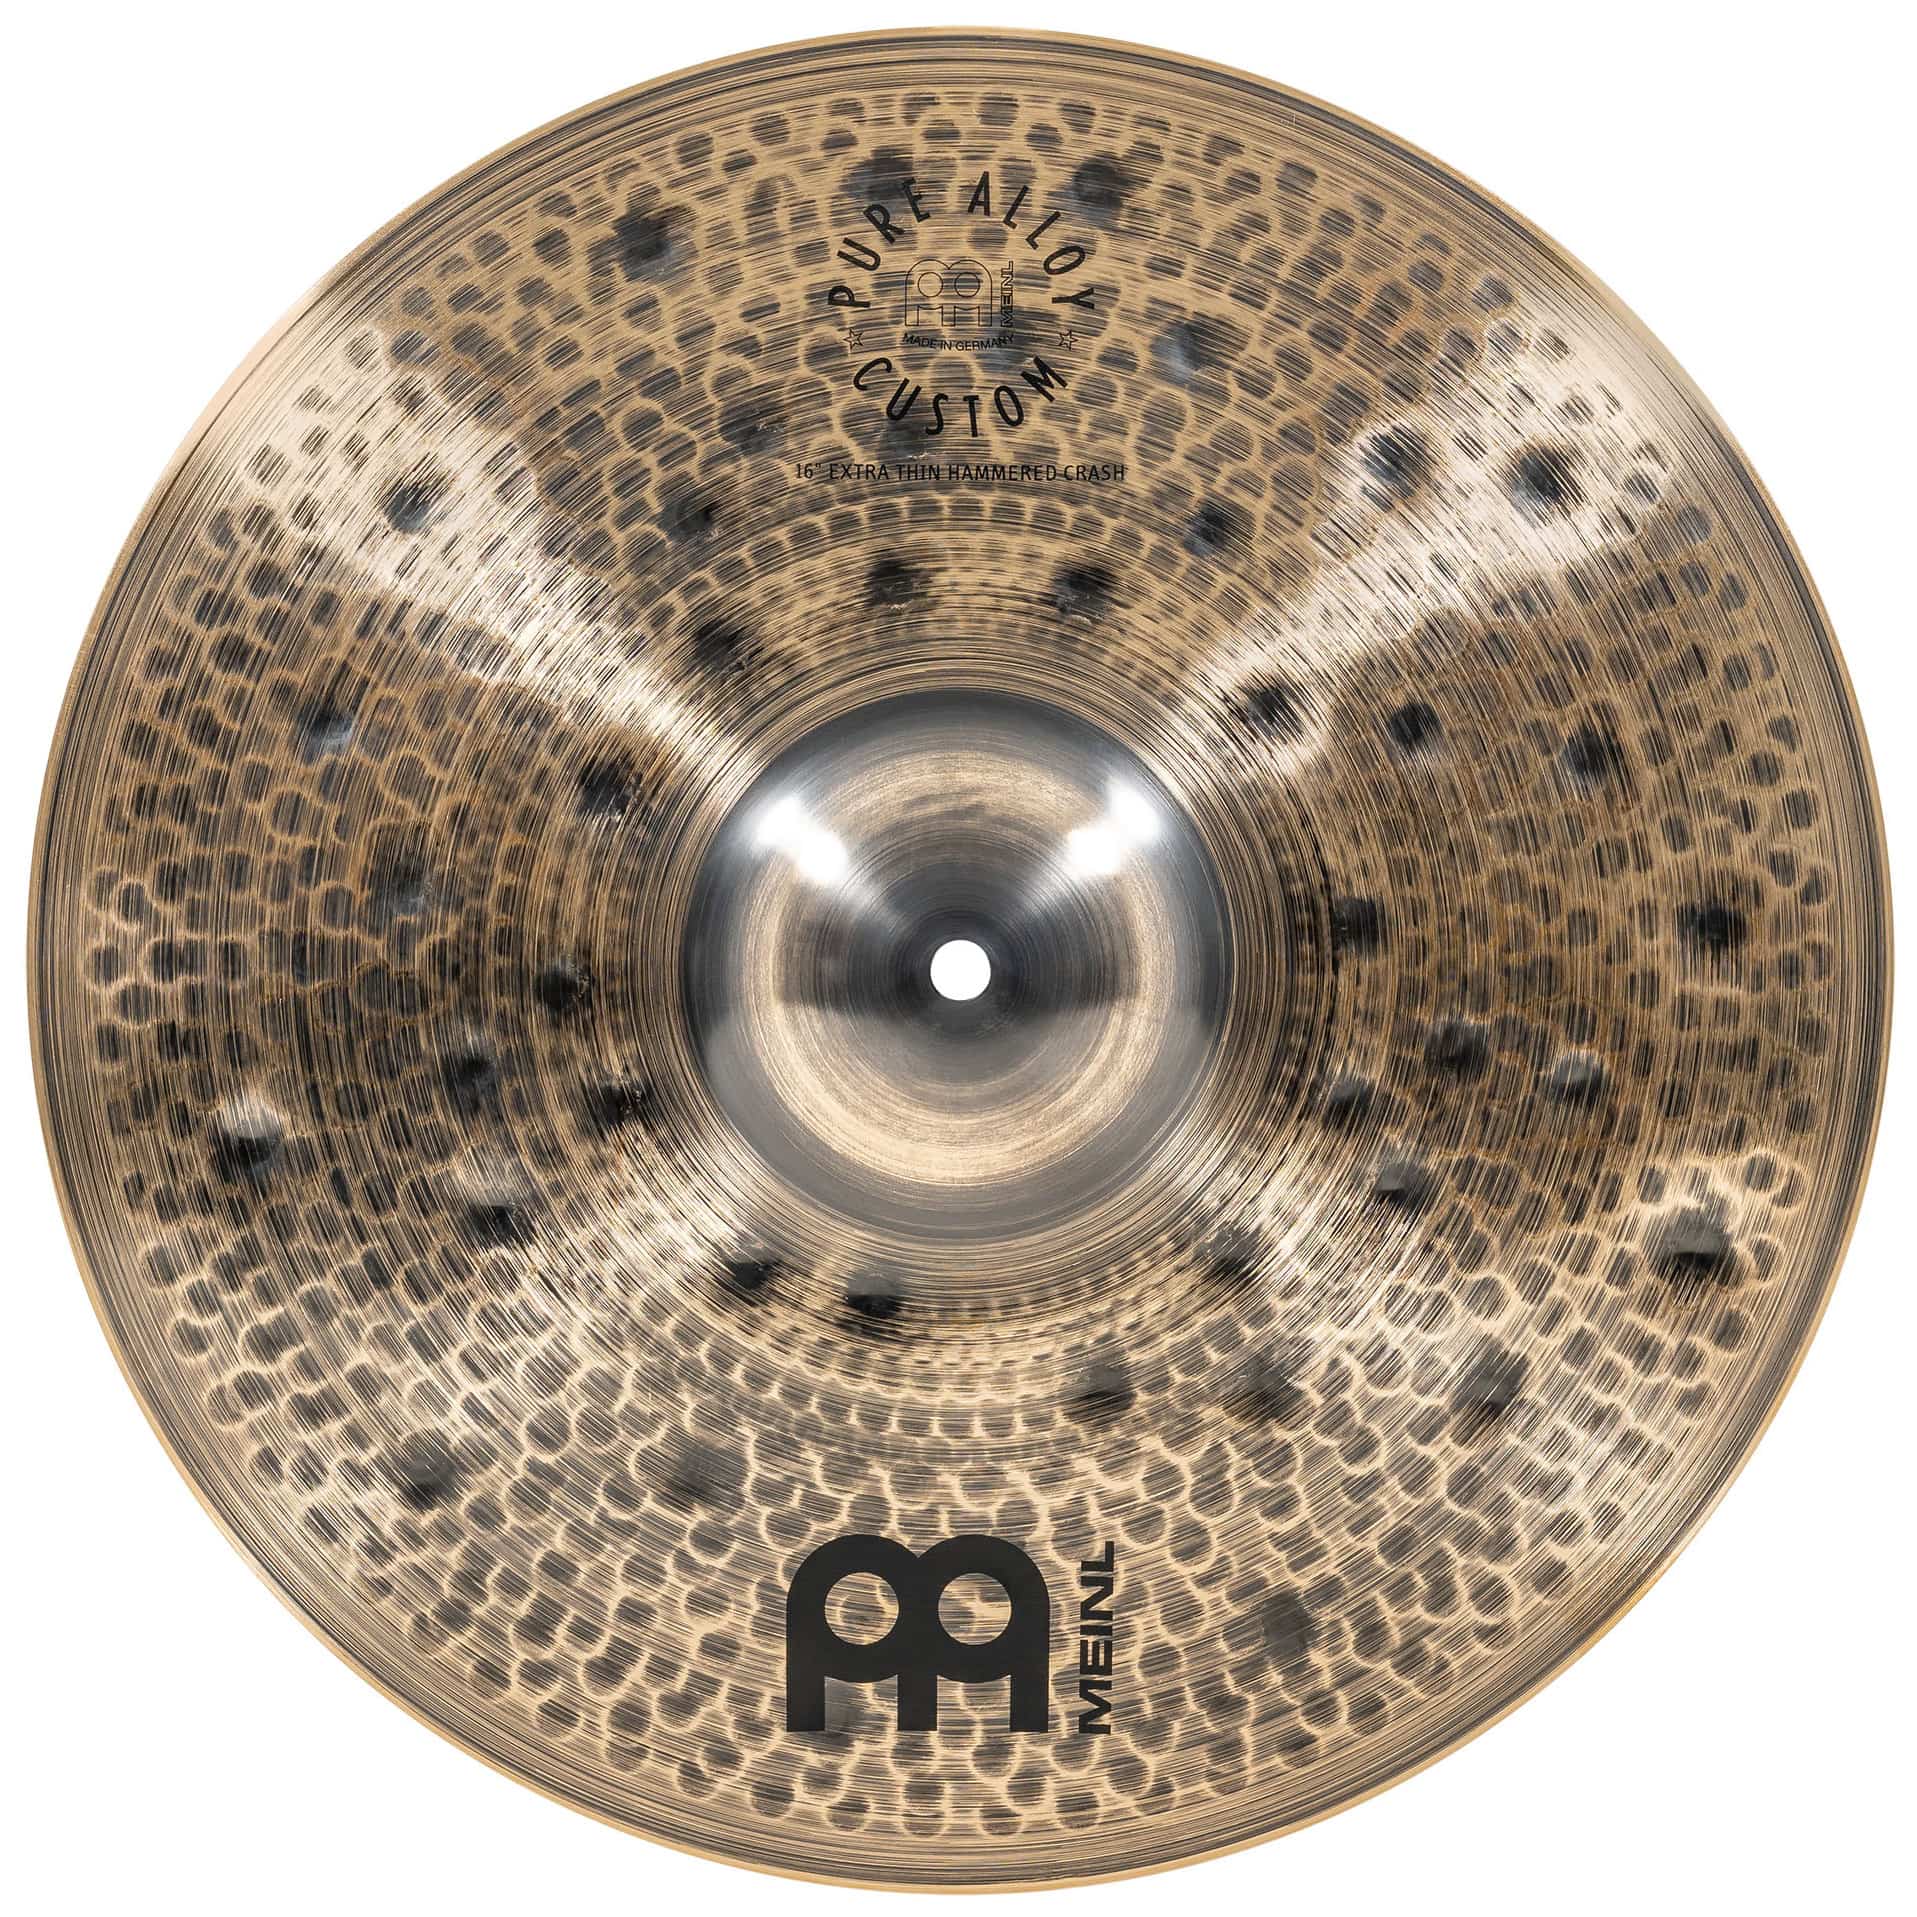 Meinl Cymbals PAC16ETH - 16" Pure Alloy Custom Extra Thin Hammered Crash